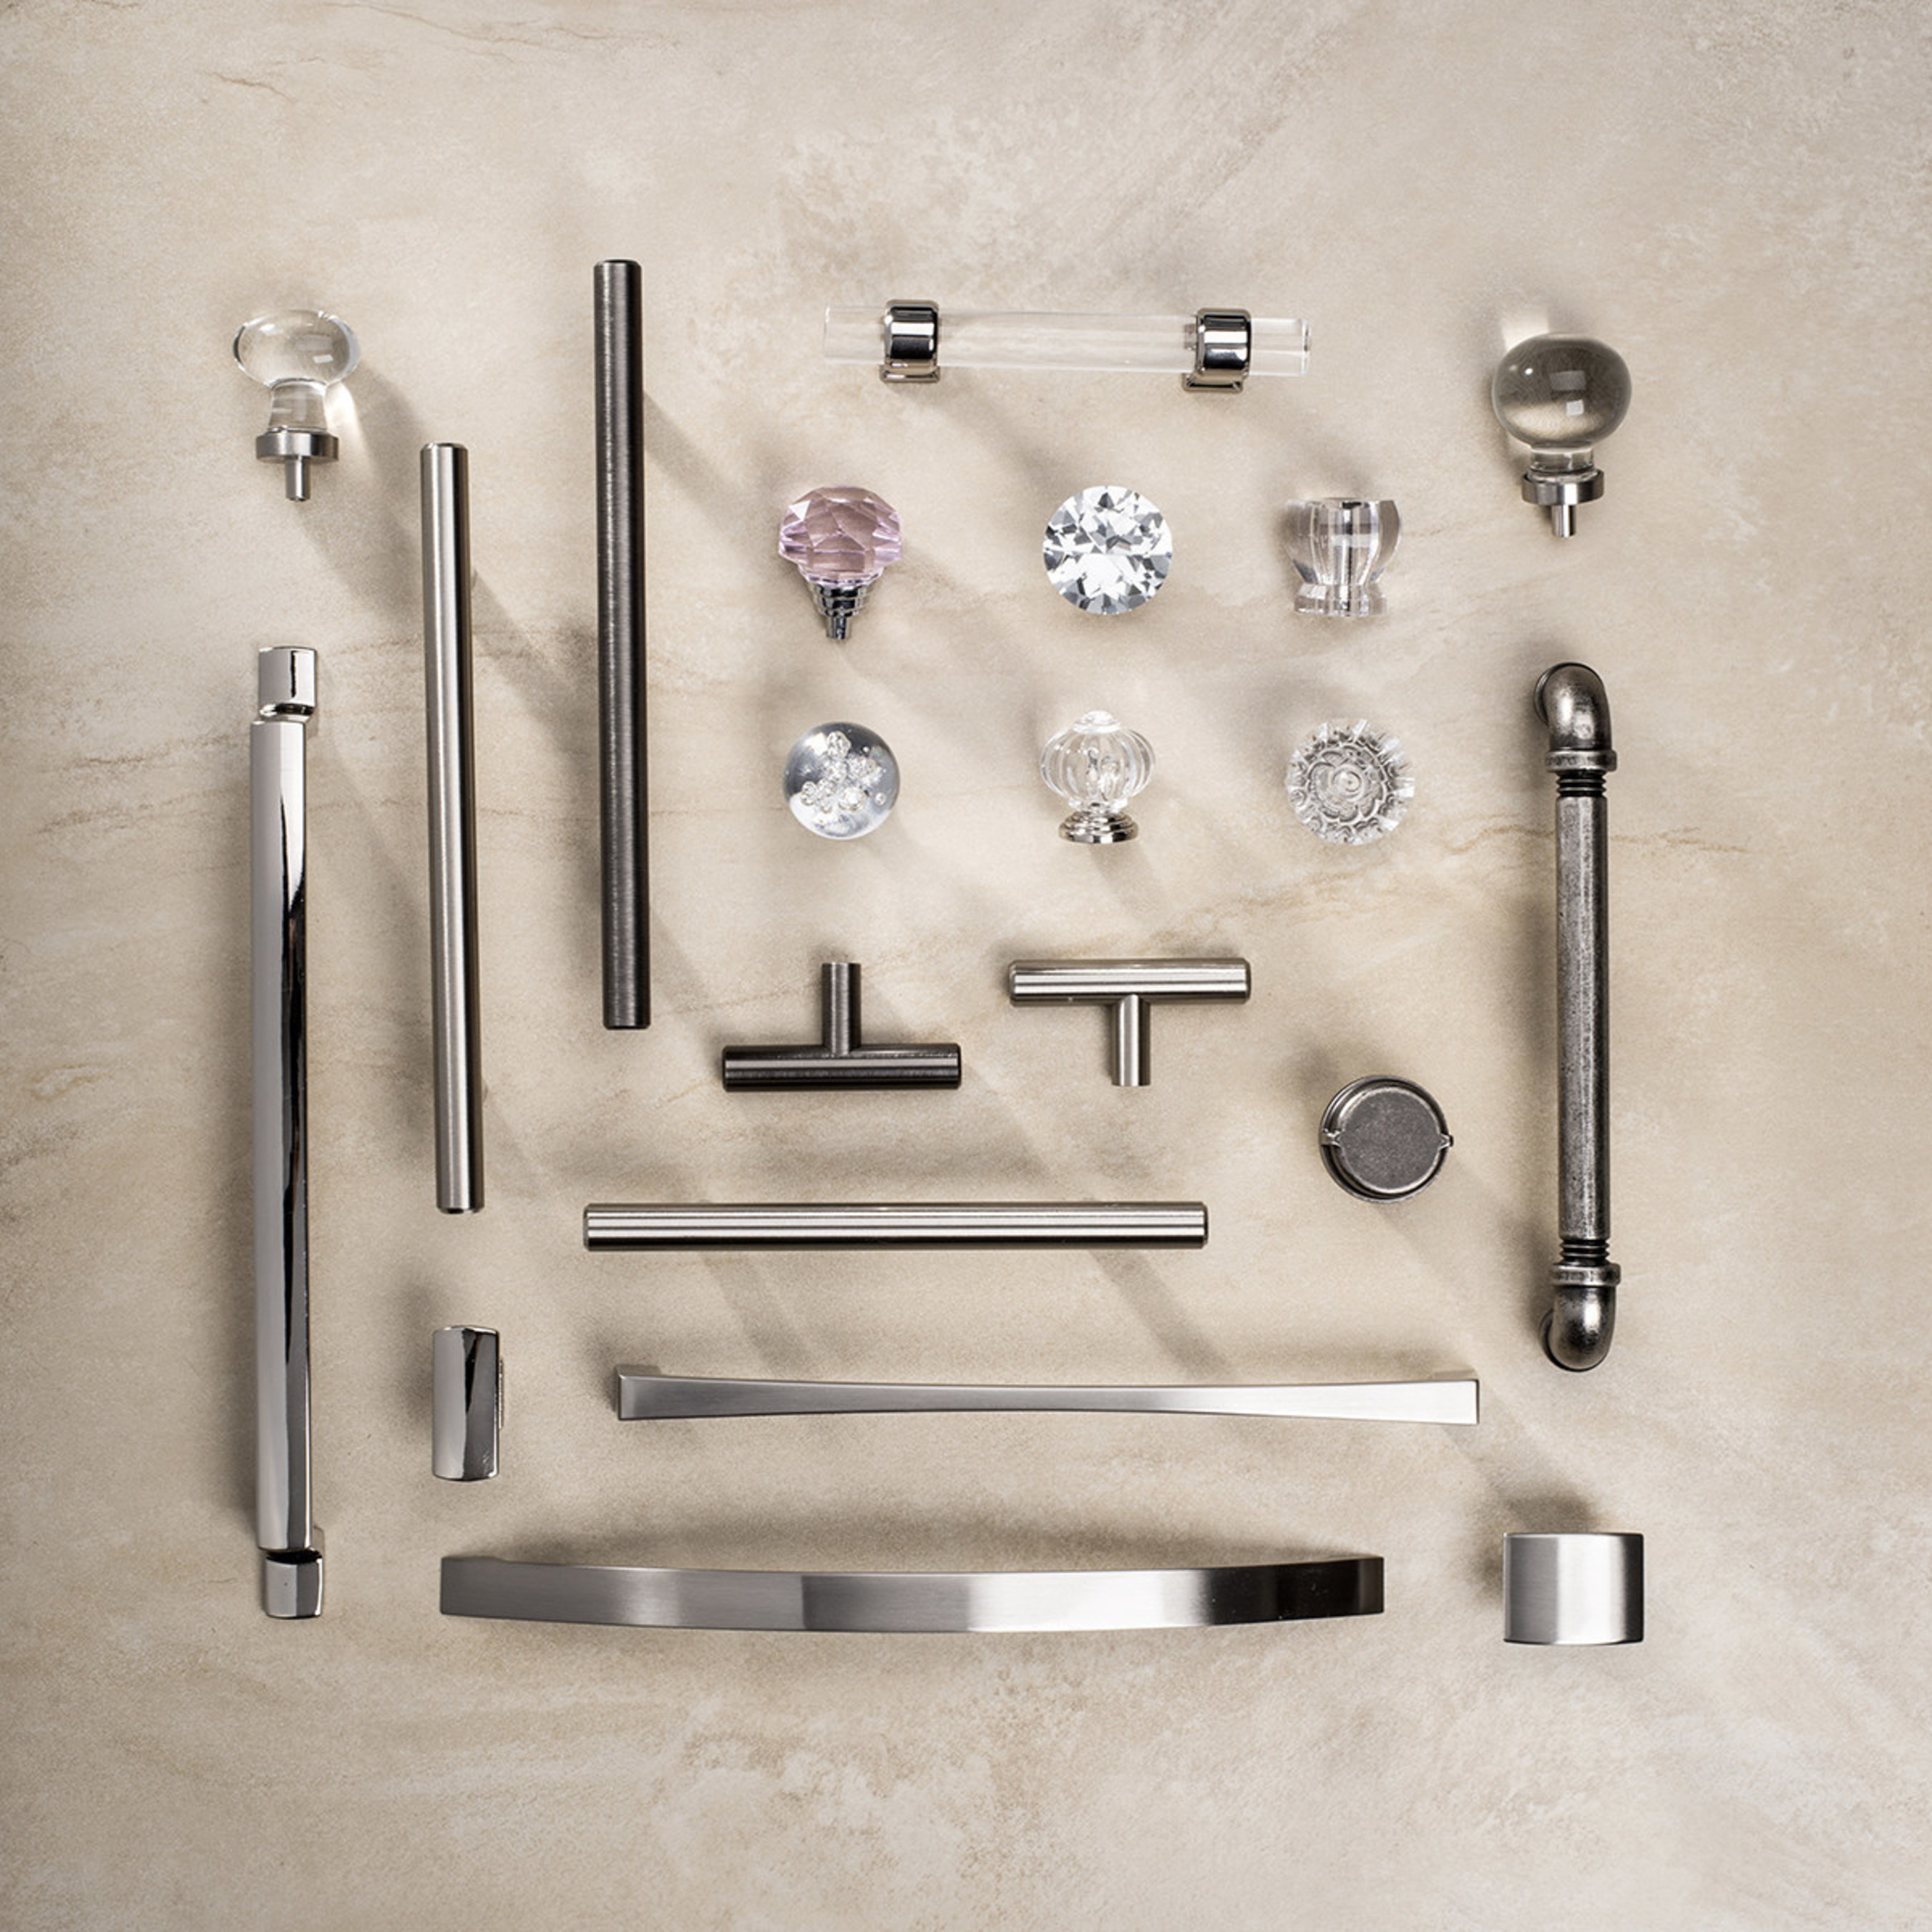 Strength, sophistication & beauty from the Hickory Hardware(R) Spring and Summer Collections